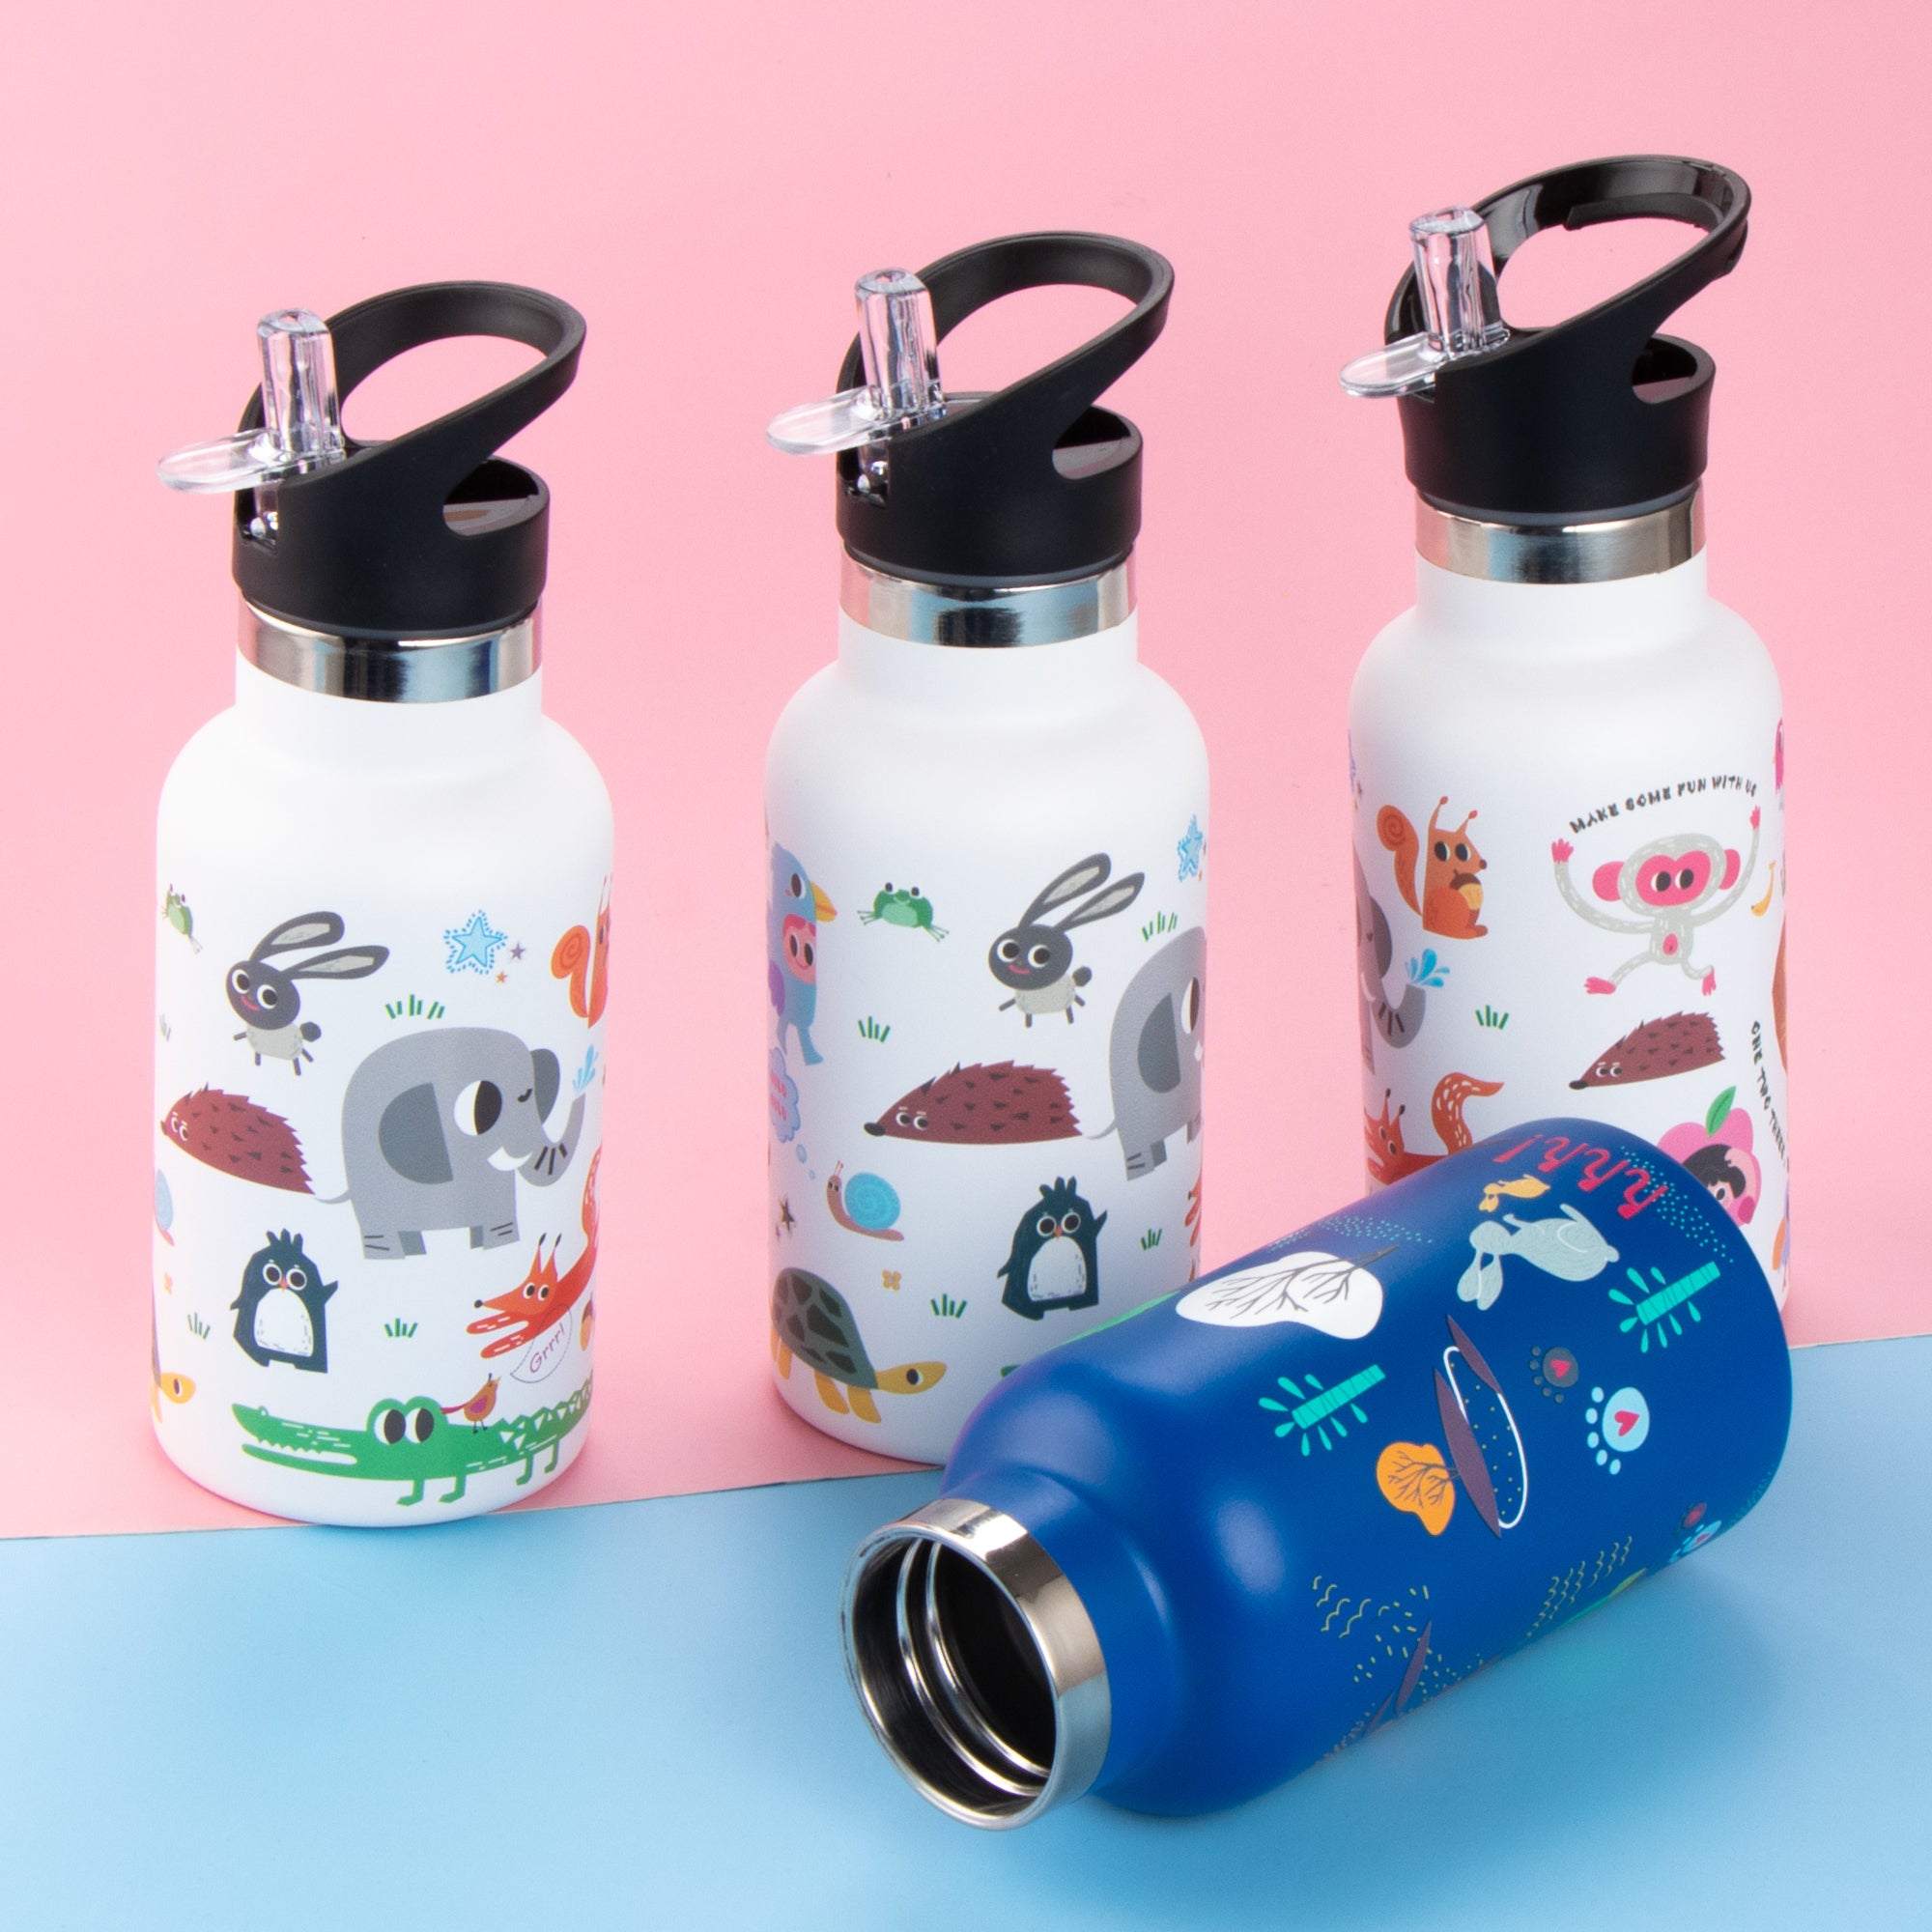 Czmx-30014 Fashion Fun Design Insulated Mini Stainless Steel Water